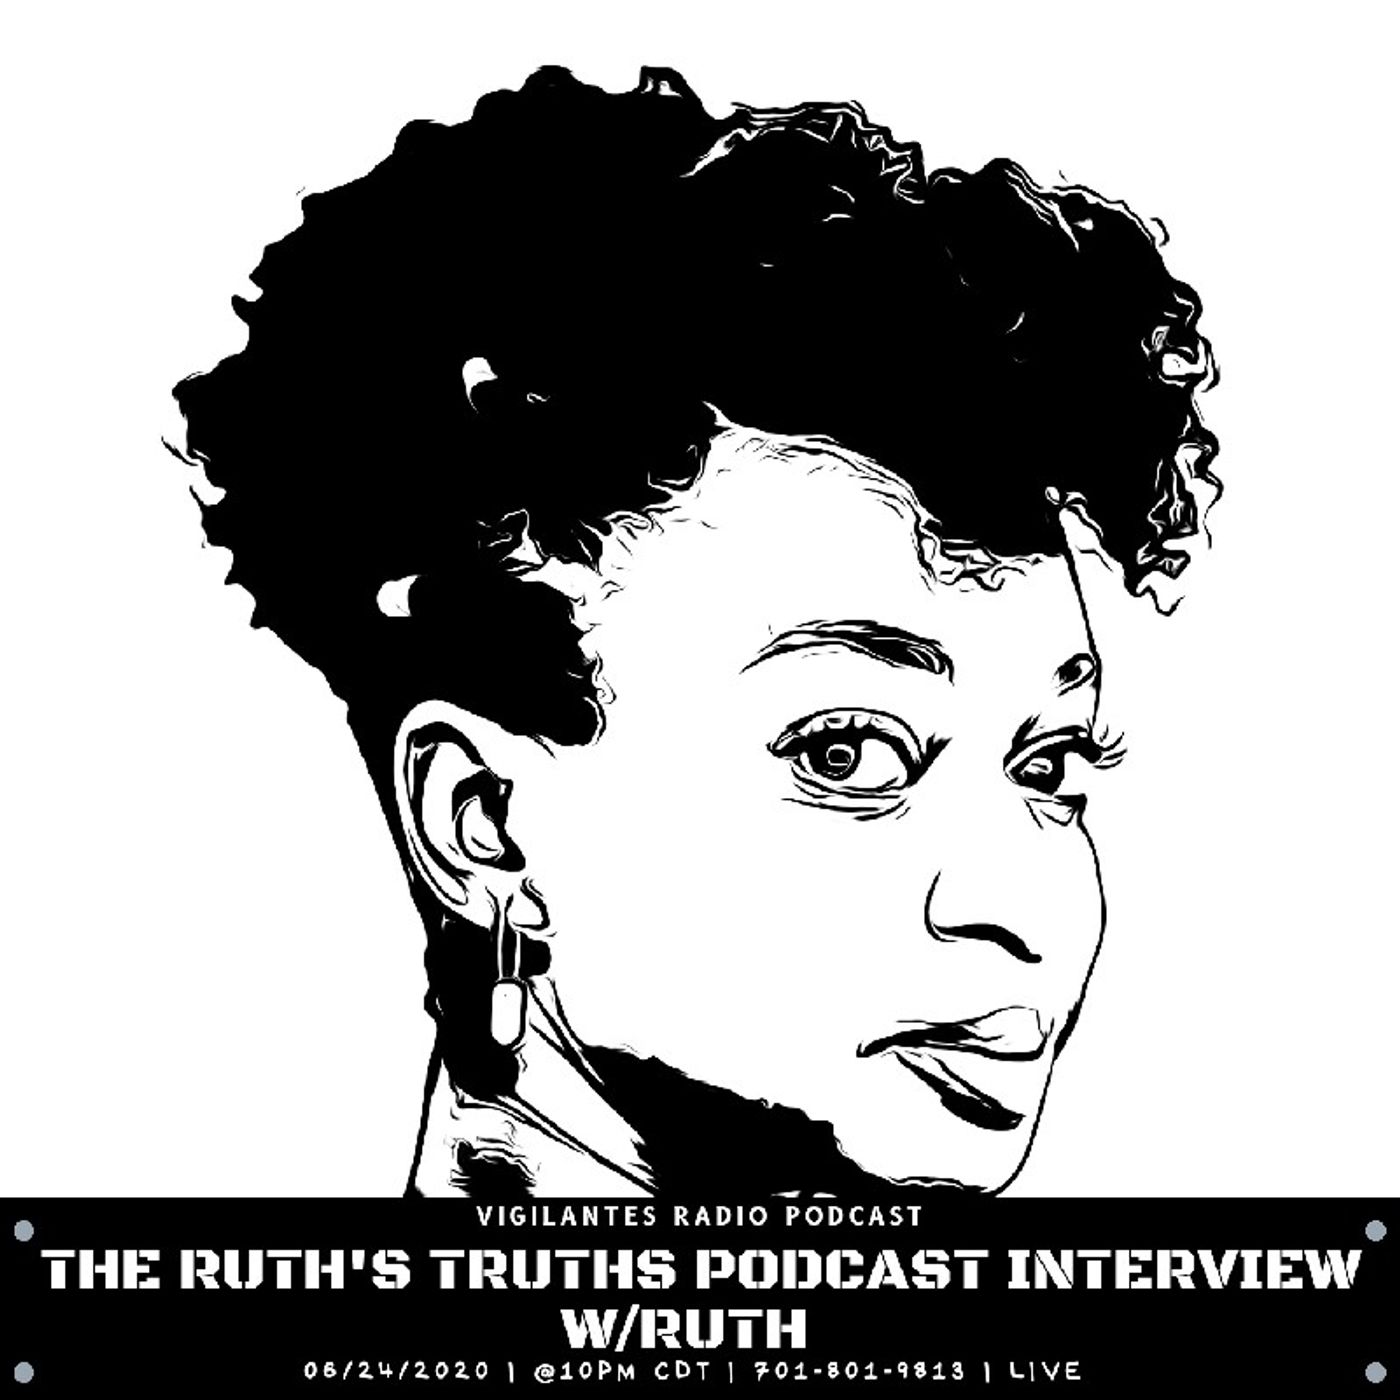 The Ruth's Truth Podcast Interview. Image